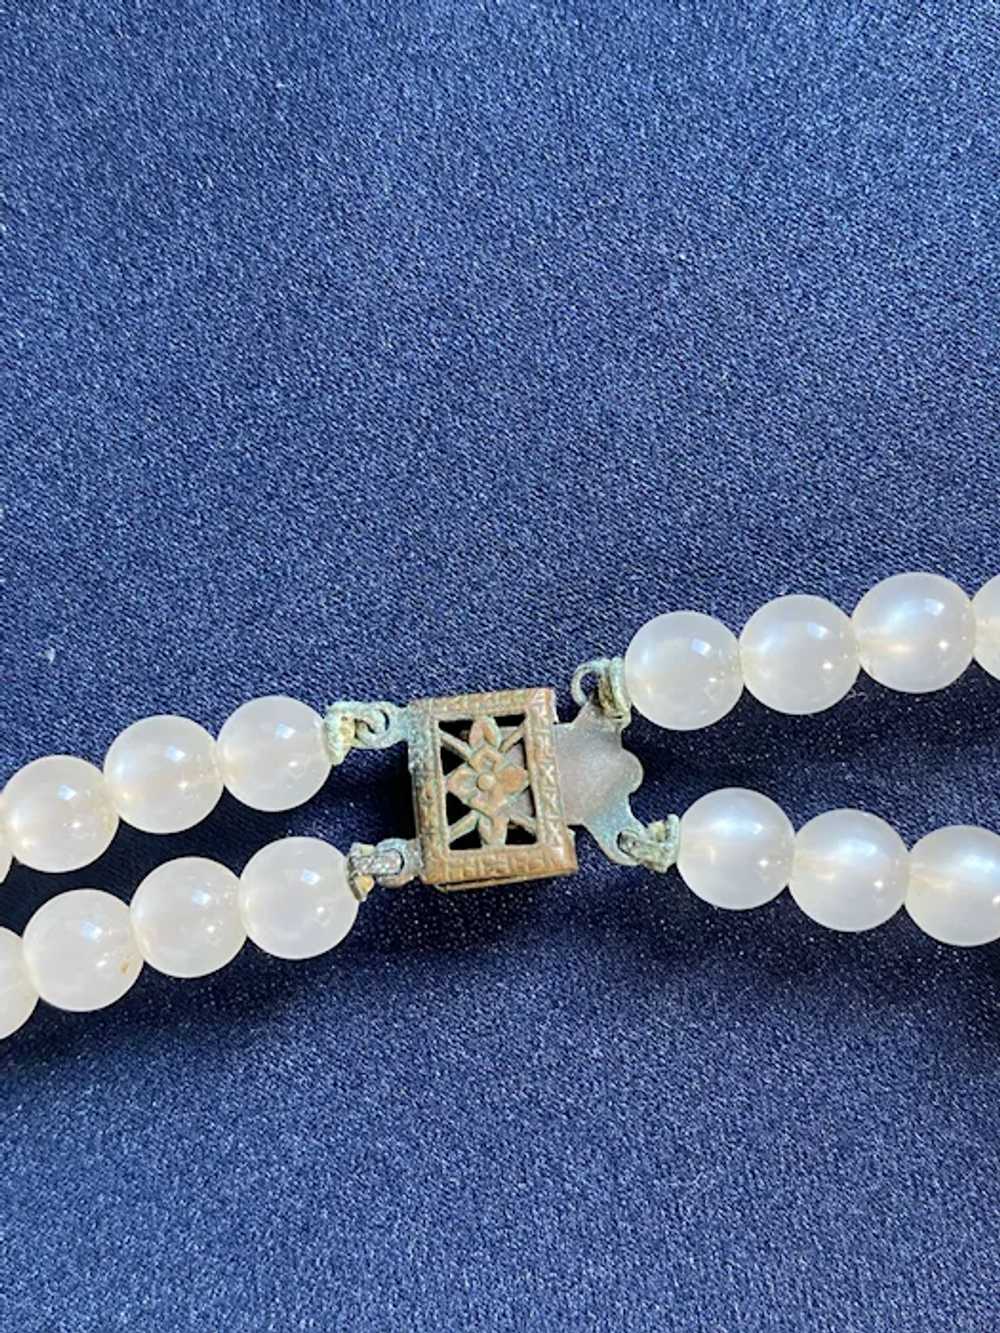 White Double Strand Graduated Moonglow Necklace - image 5